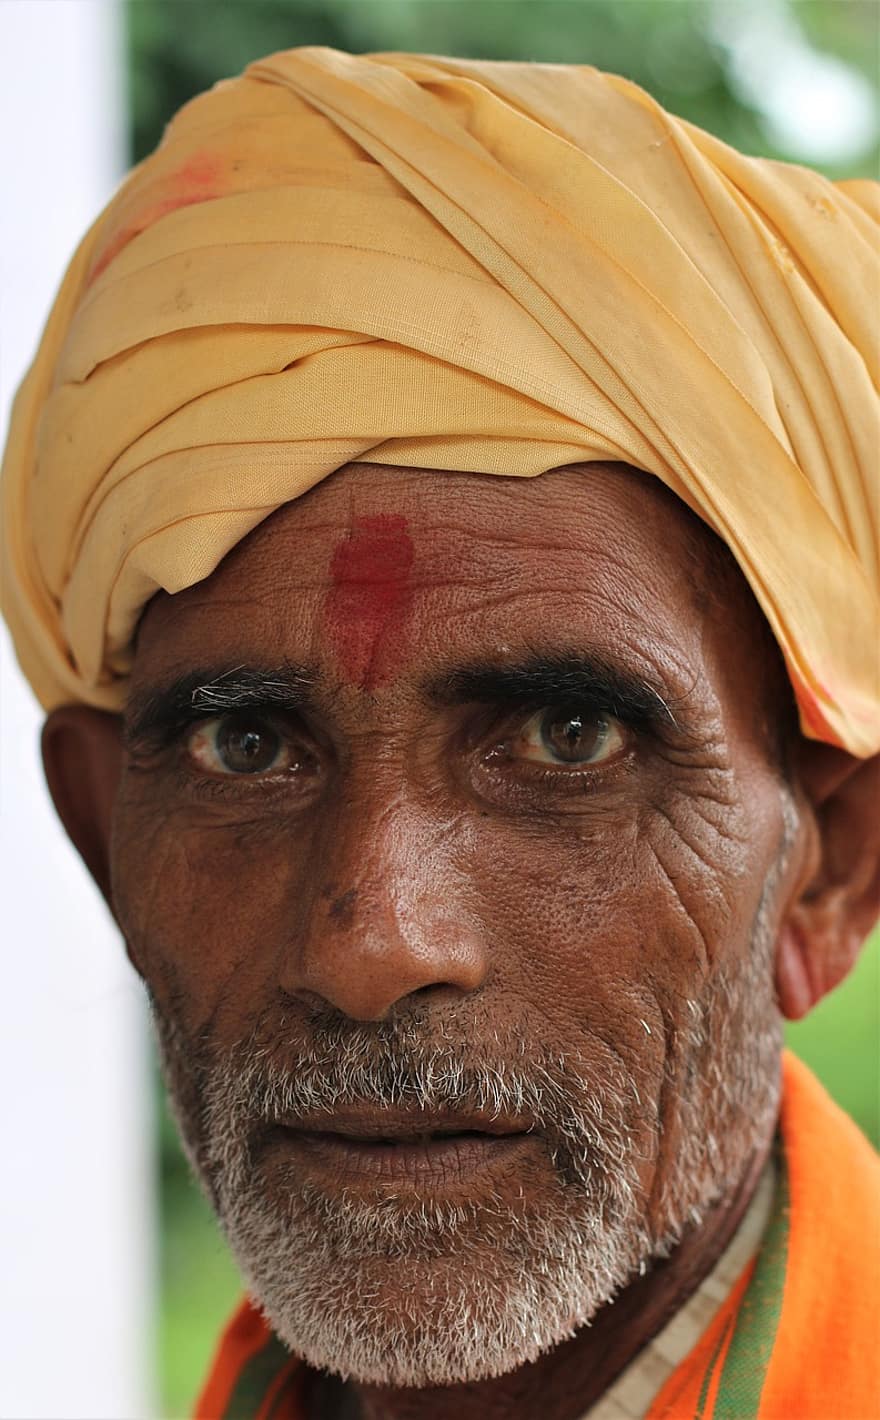 mand, ansigt, person, indien, rajasthan